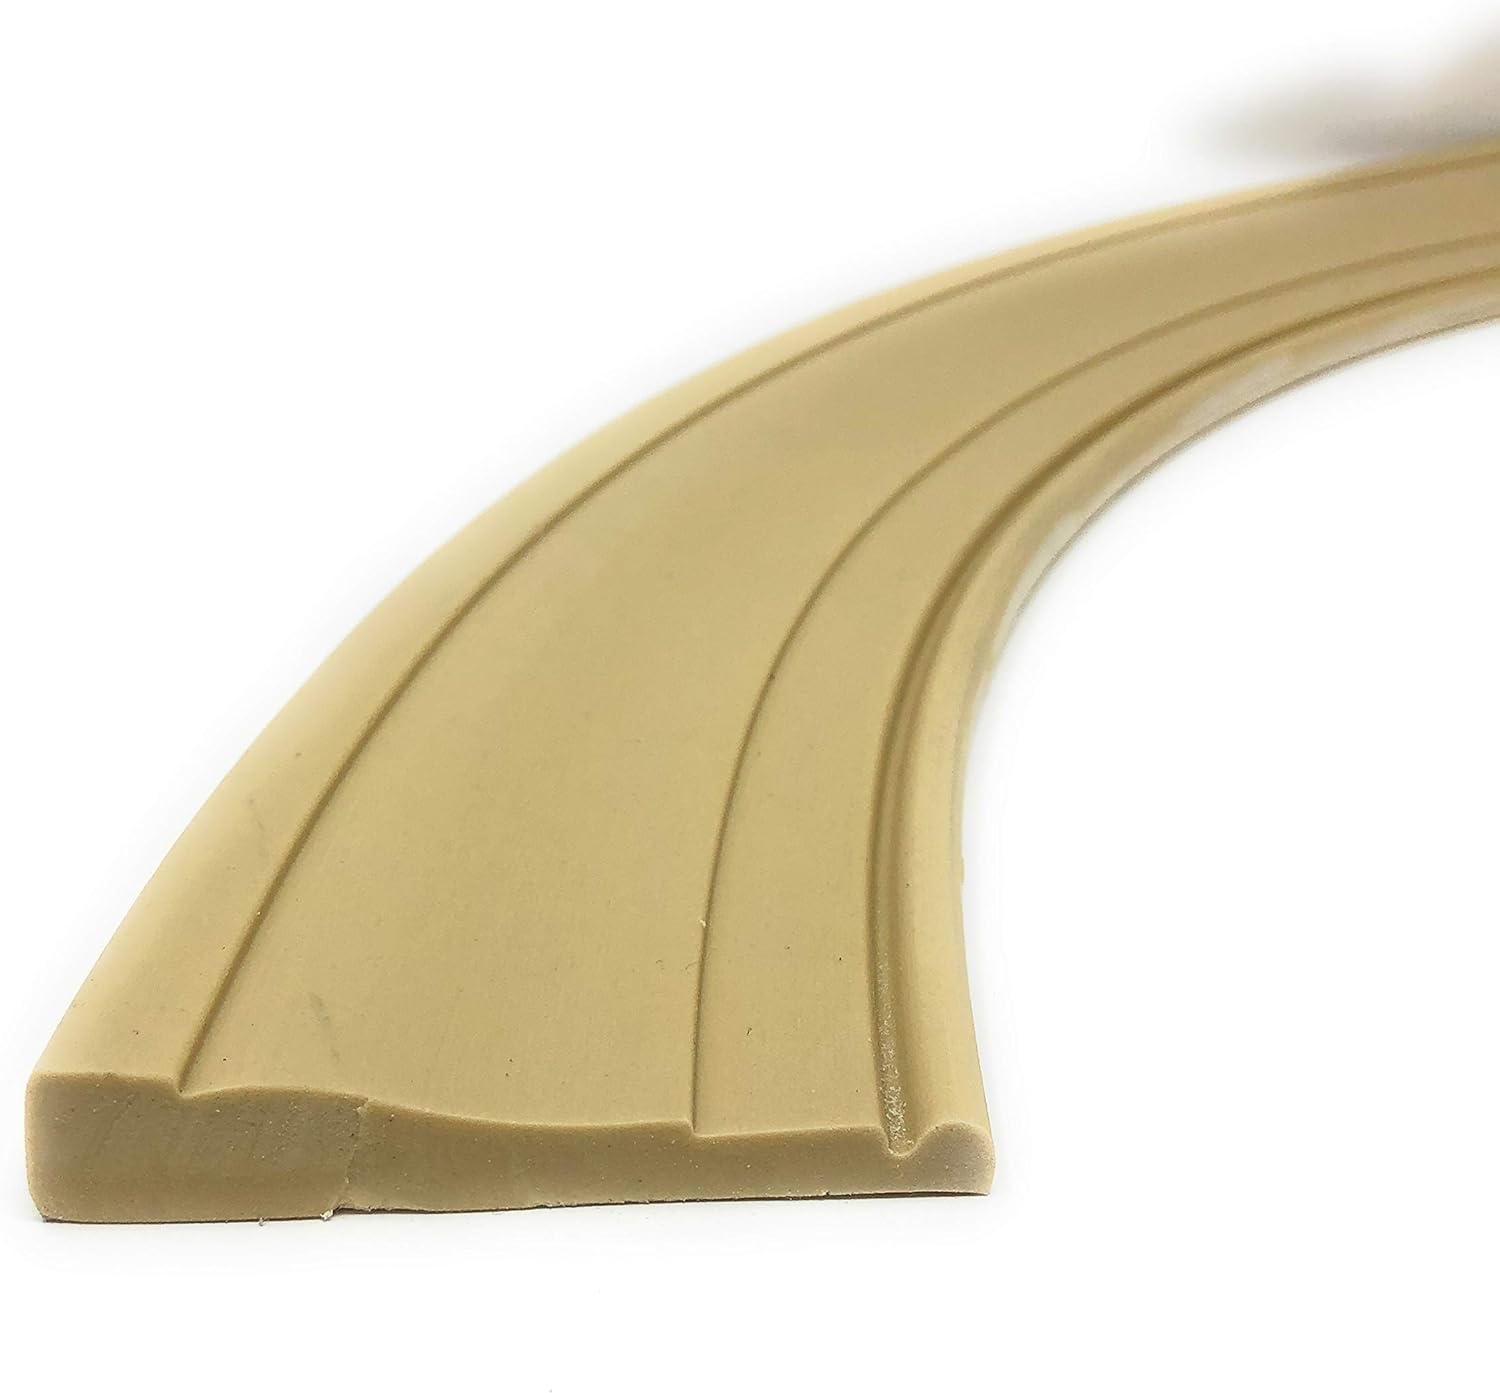 FLEXTRIM #445: Flexible Casing Molding: 11/16" Thick x 3.25" Wide - PRE Curved to fit Half Round Windows 34" to 40"